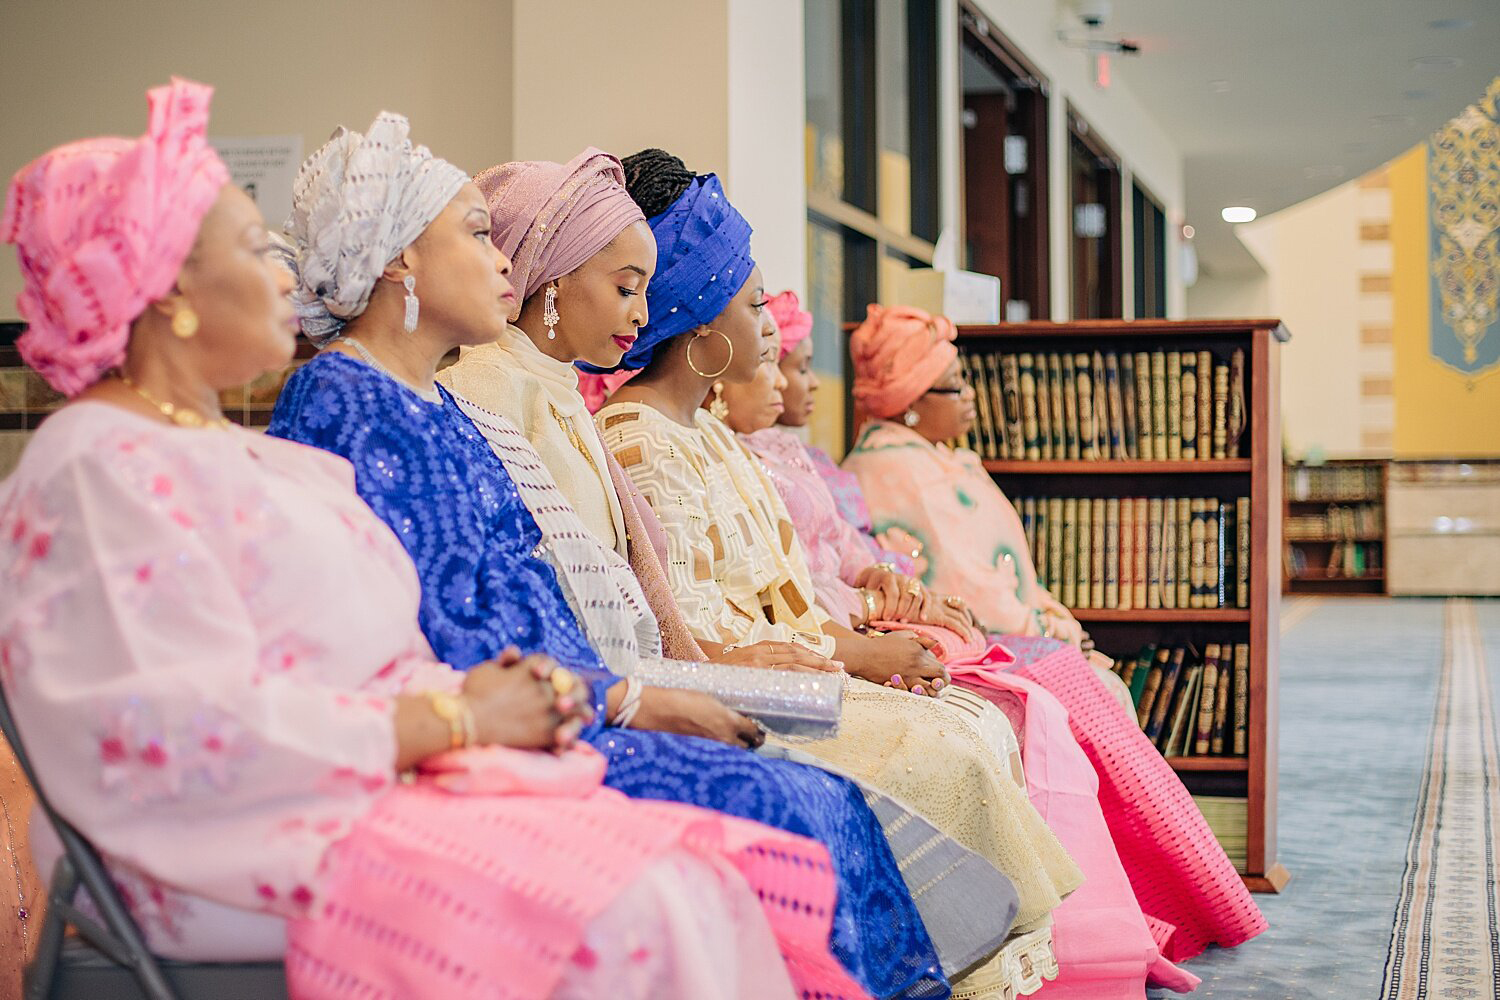 A bride and women sit together during a 2019 Muslim Nikkah, or wedding, at the Mecca Center in Willowbrook, Illinois. Photo by Fariha Wajid Photography